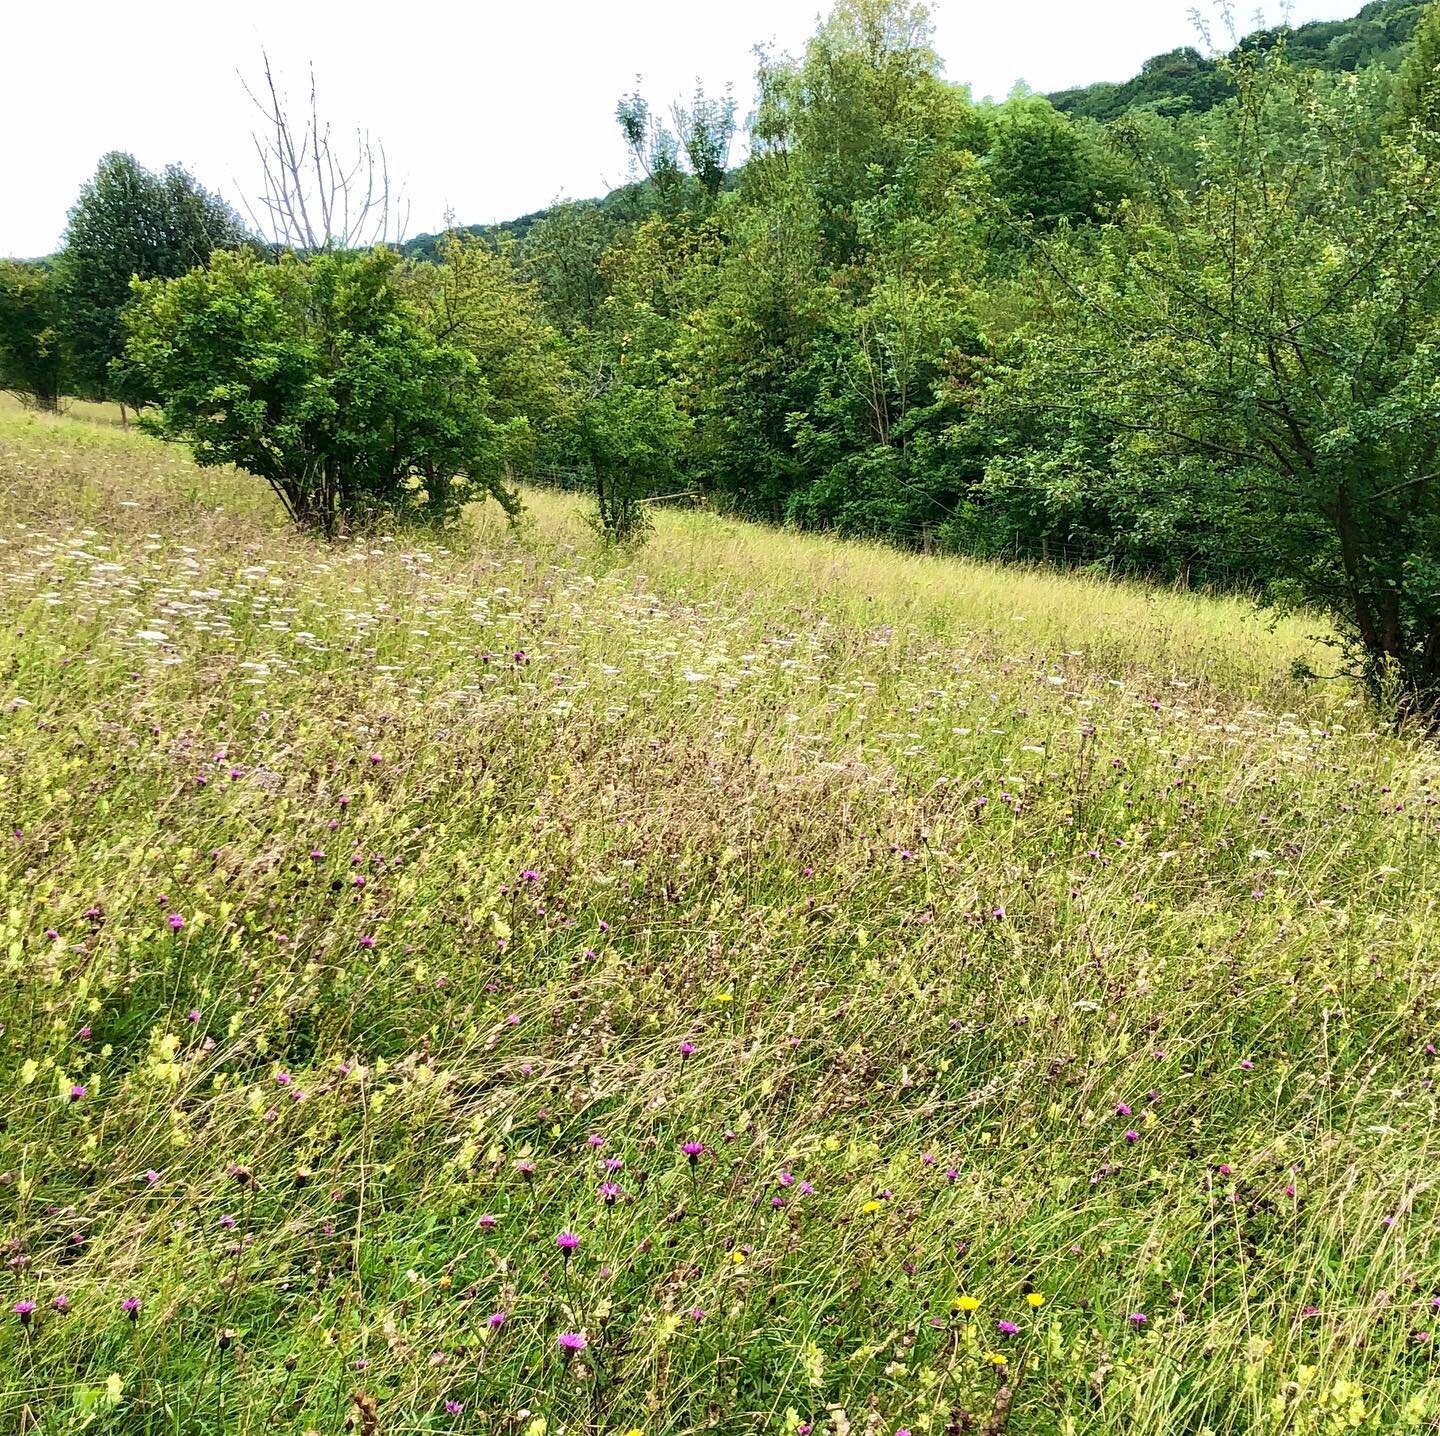 Croydon - who&rsquo;d have thought it?
Finally visited the famed Hutchinson&rsquo;s Bank, a hidden gem of chalk grassland in, yes, #croydon - waist high wild flowers, humming with insects - a total joy!
#urbannature #londonwildlife #flowersofthechalk